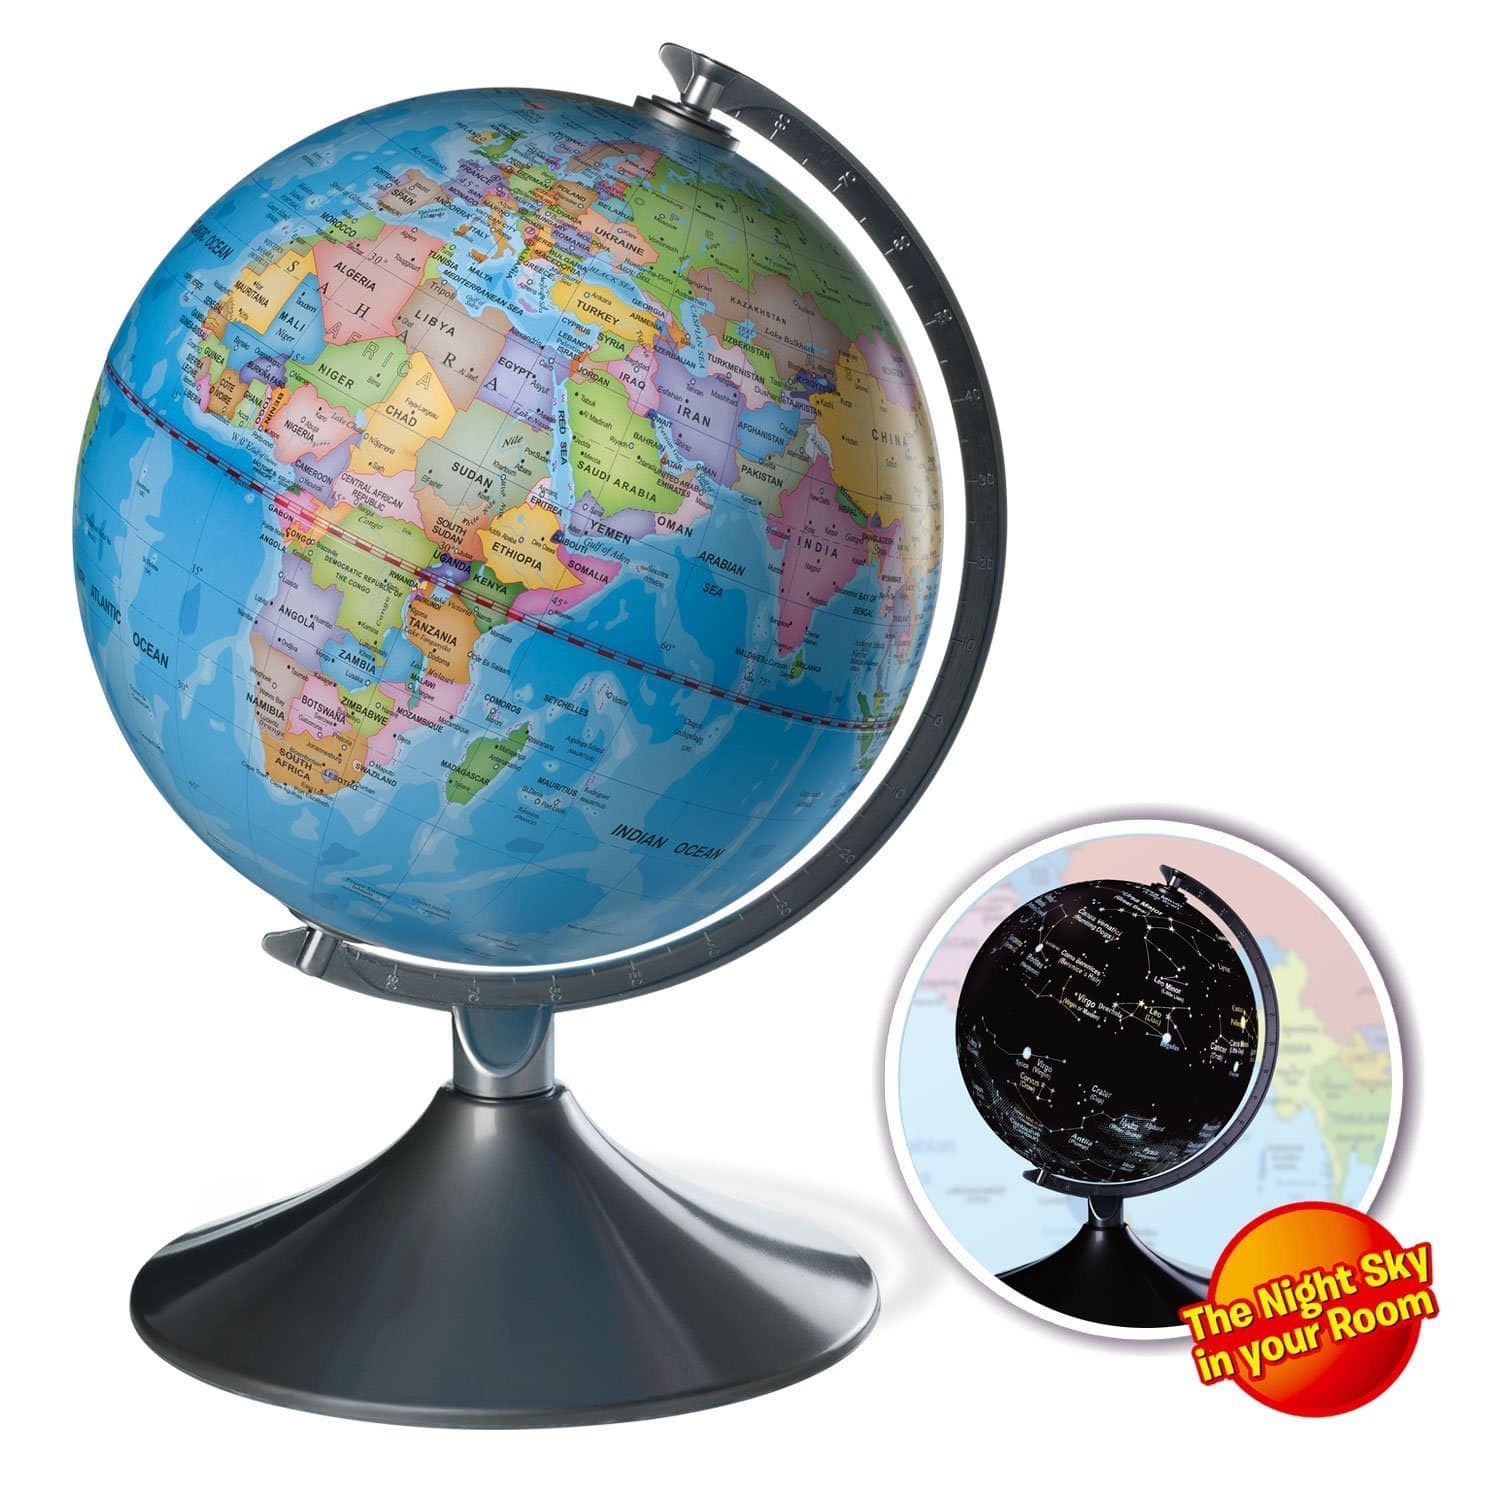 LIGHTNING DEAL ALERT! Interactive Globe for Kids, 2 in 1, Day View World Globe and Night View Illuminated Constellation Map – 33% off!